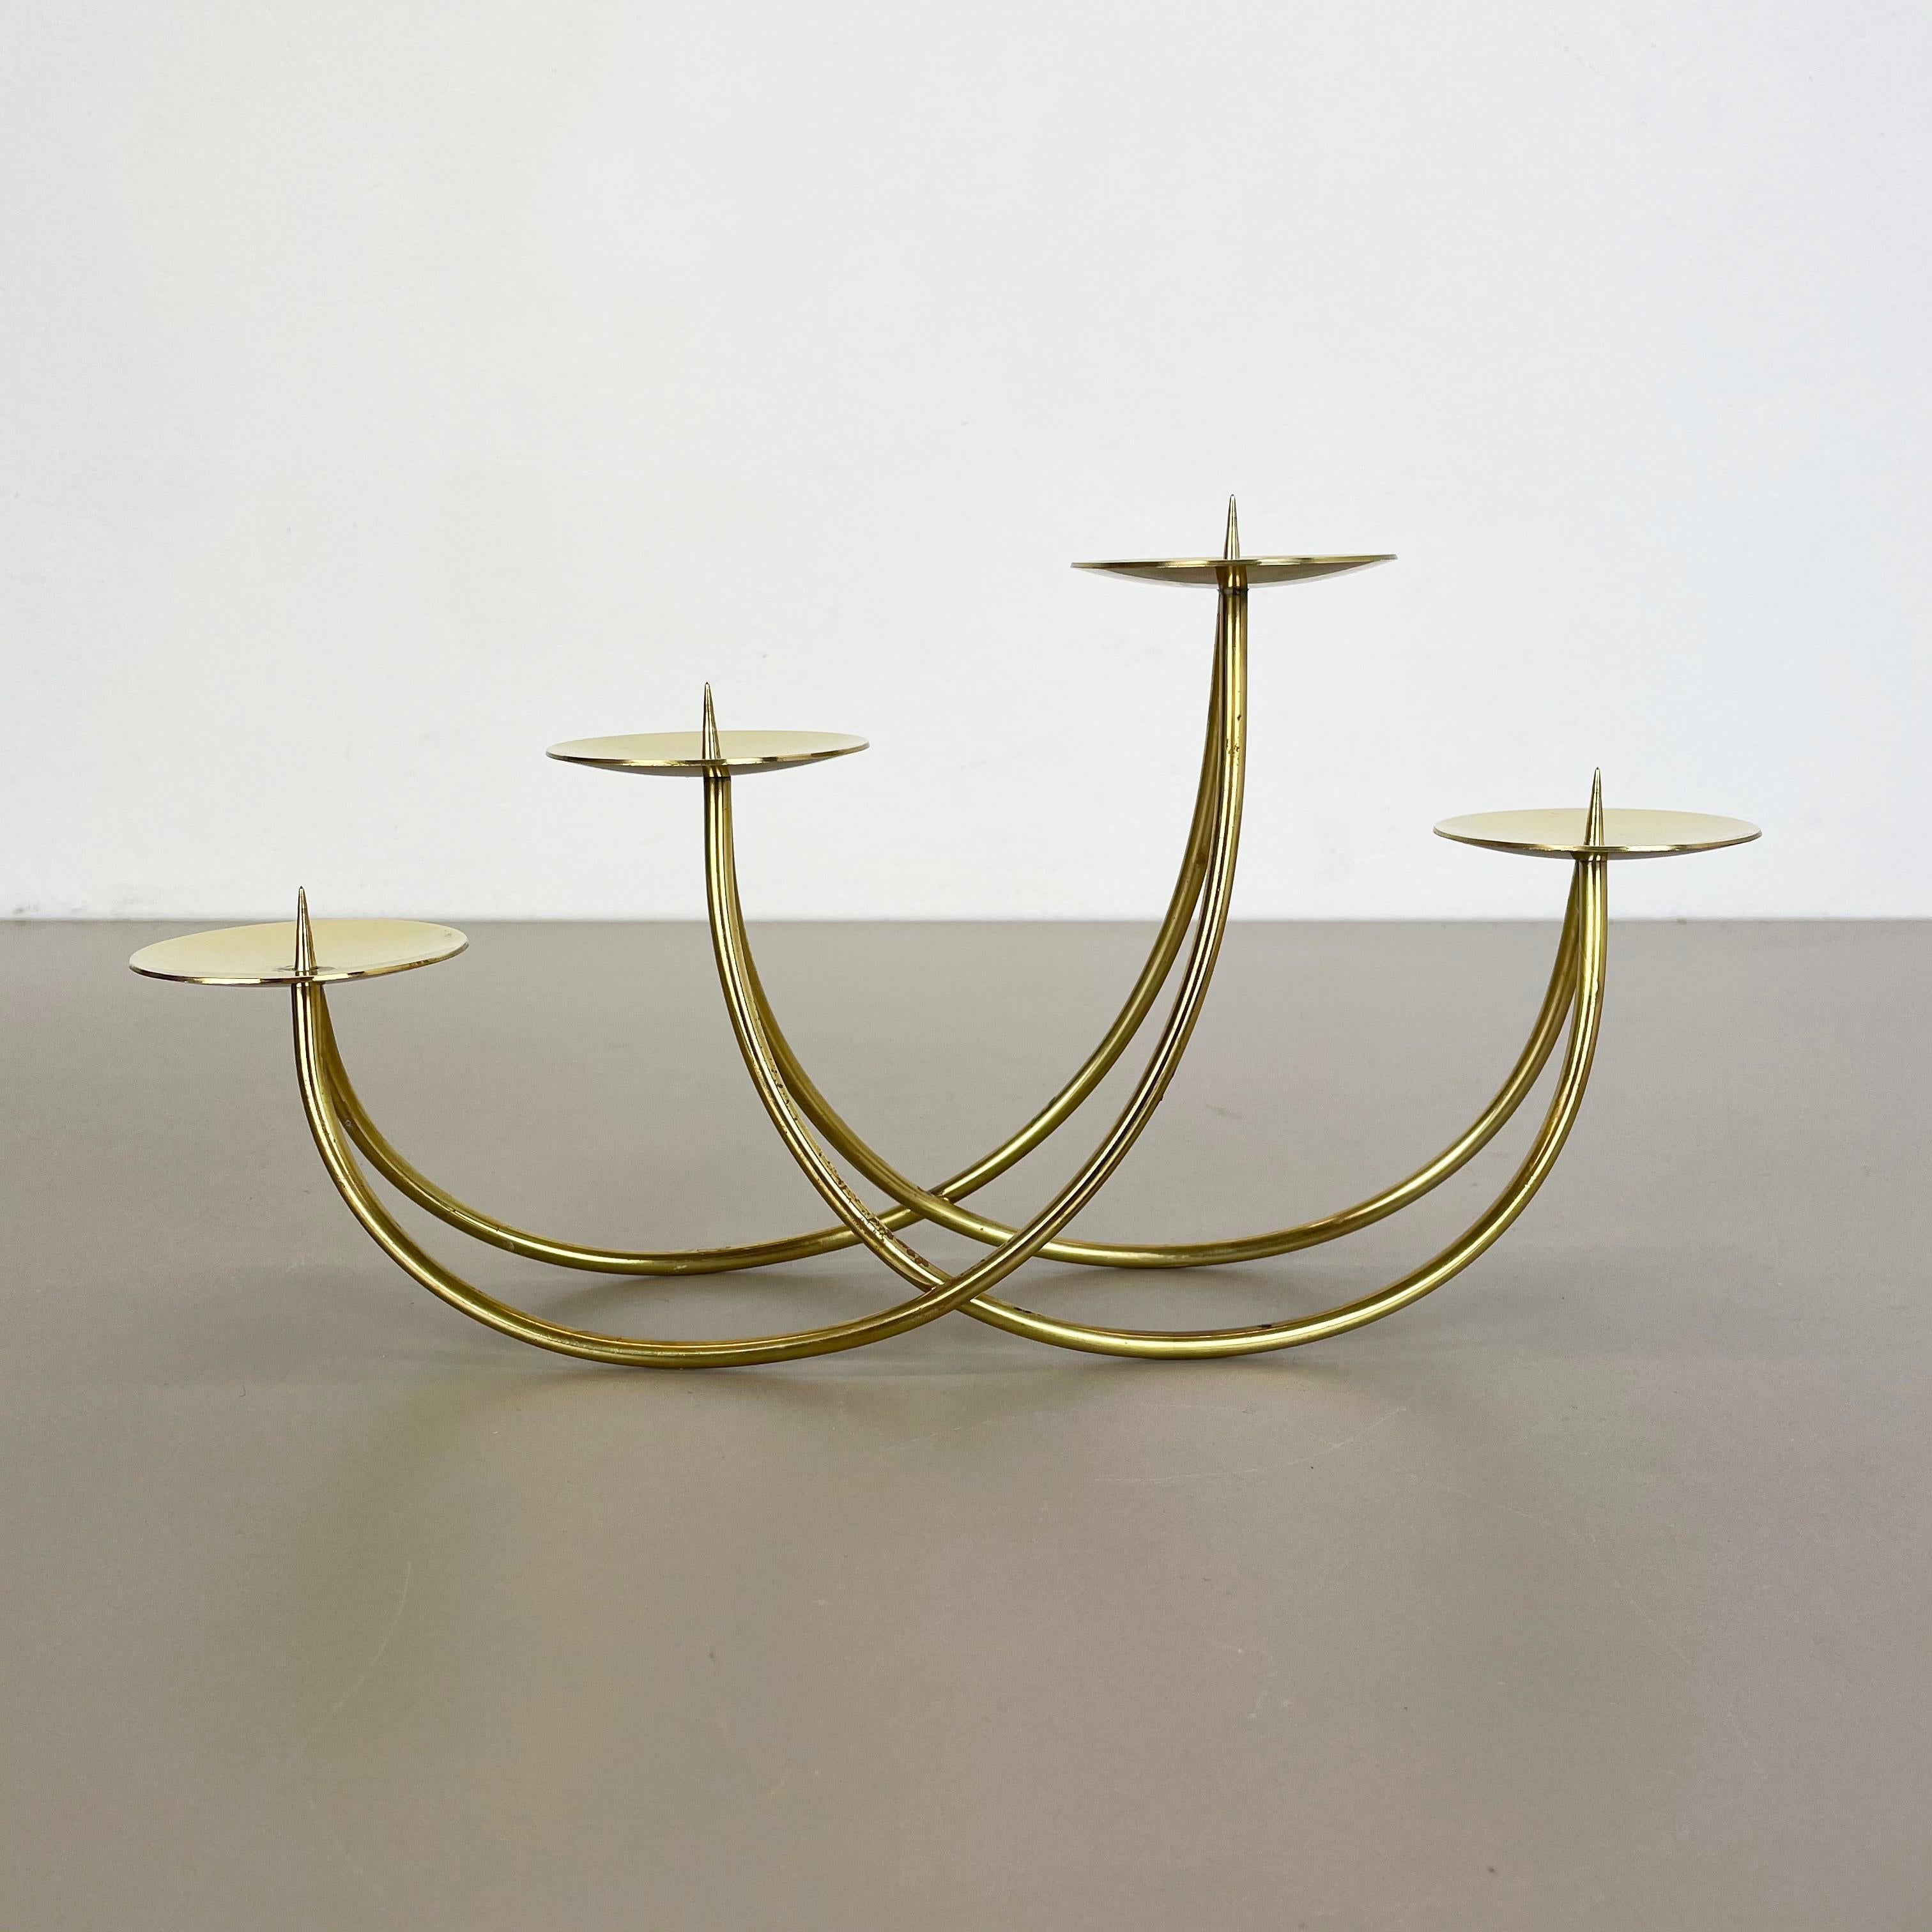 Sculptural Solid Brass Candleholder by Harald Buchrucker Bauhaus, Germany, 1950s In Good Condition For Sale In Kirchlengern, DE